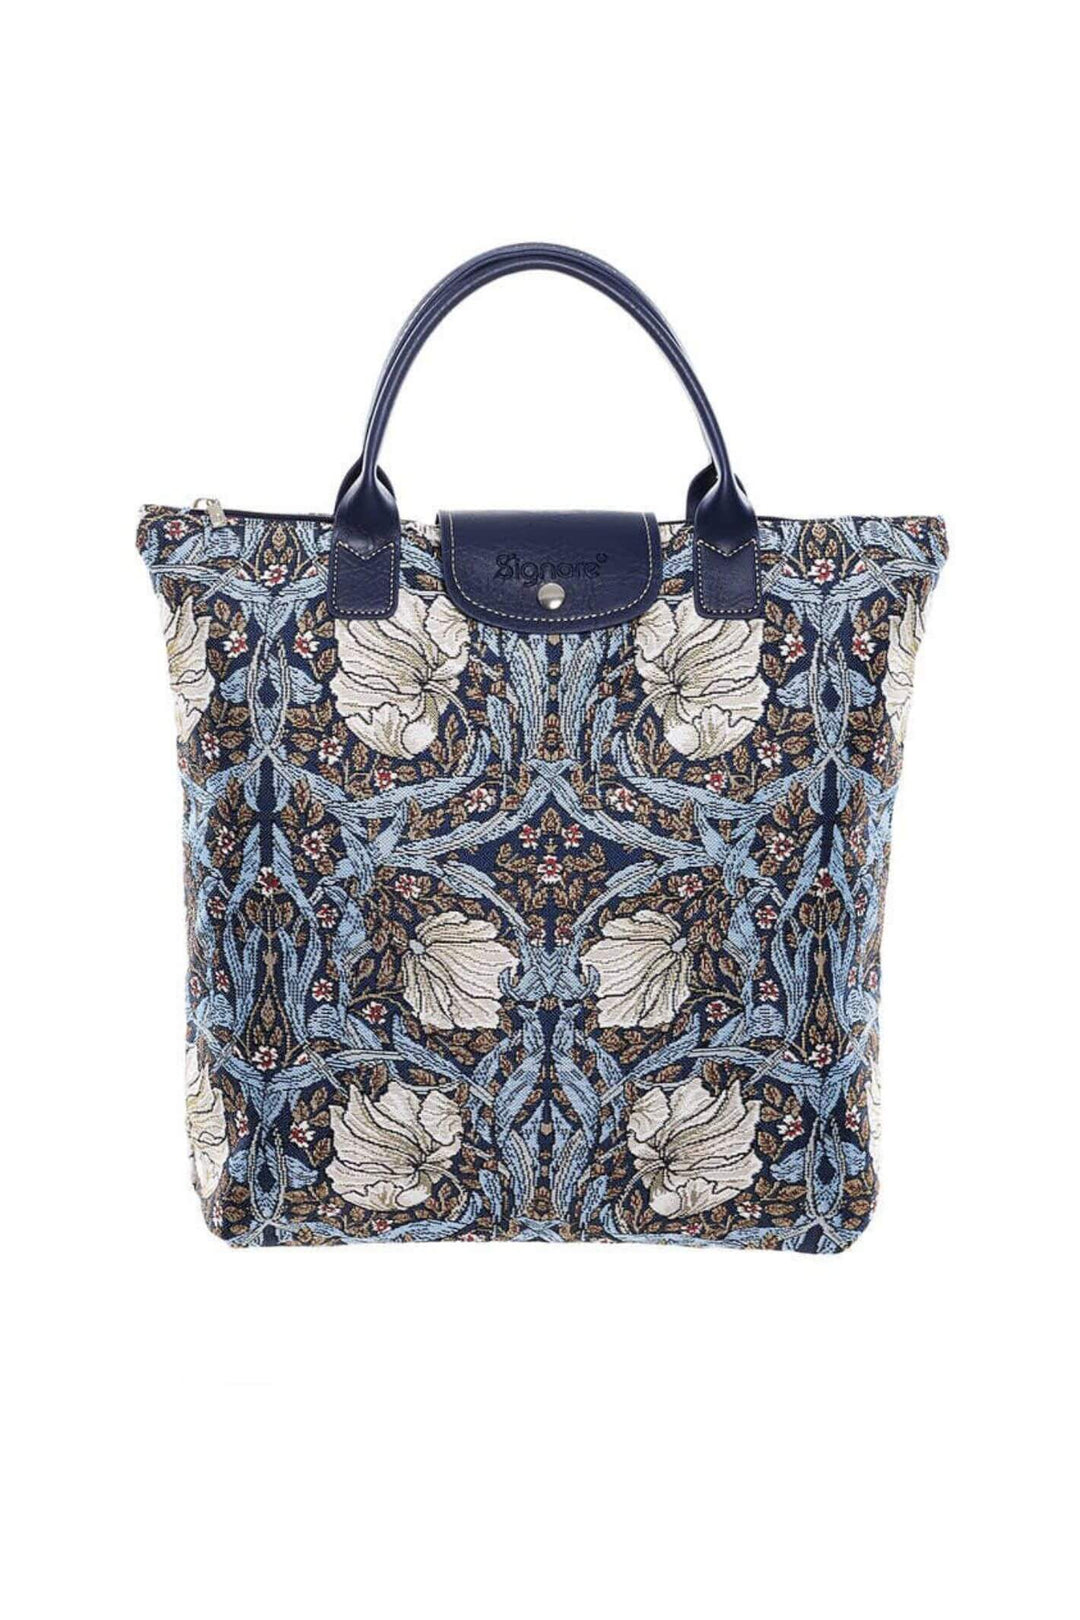 William Morris Pimpernel and Thyme Blue Le Pliage Folding Tote Bag